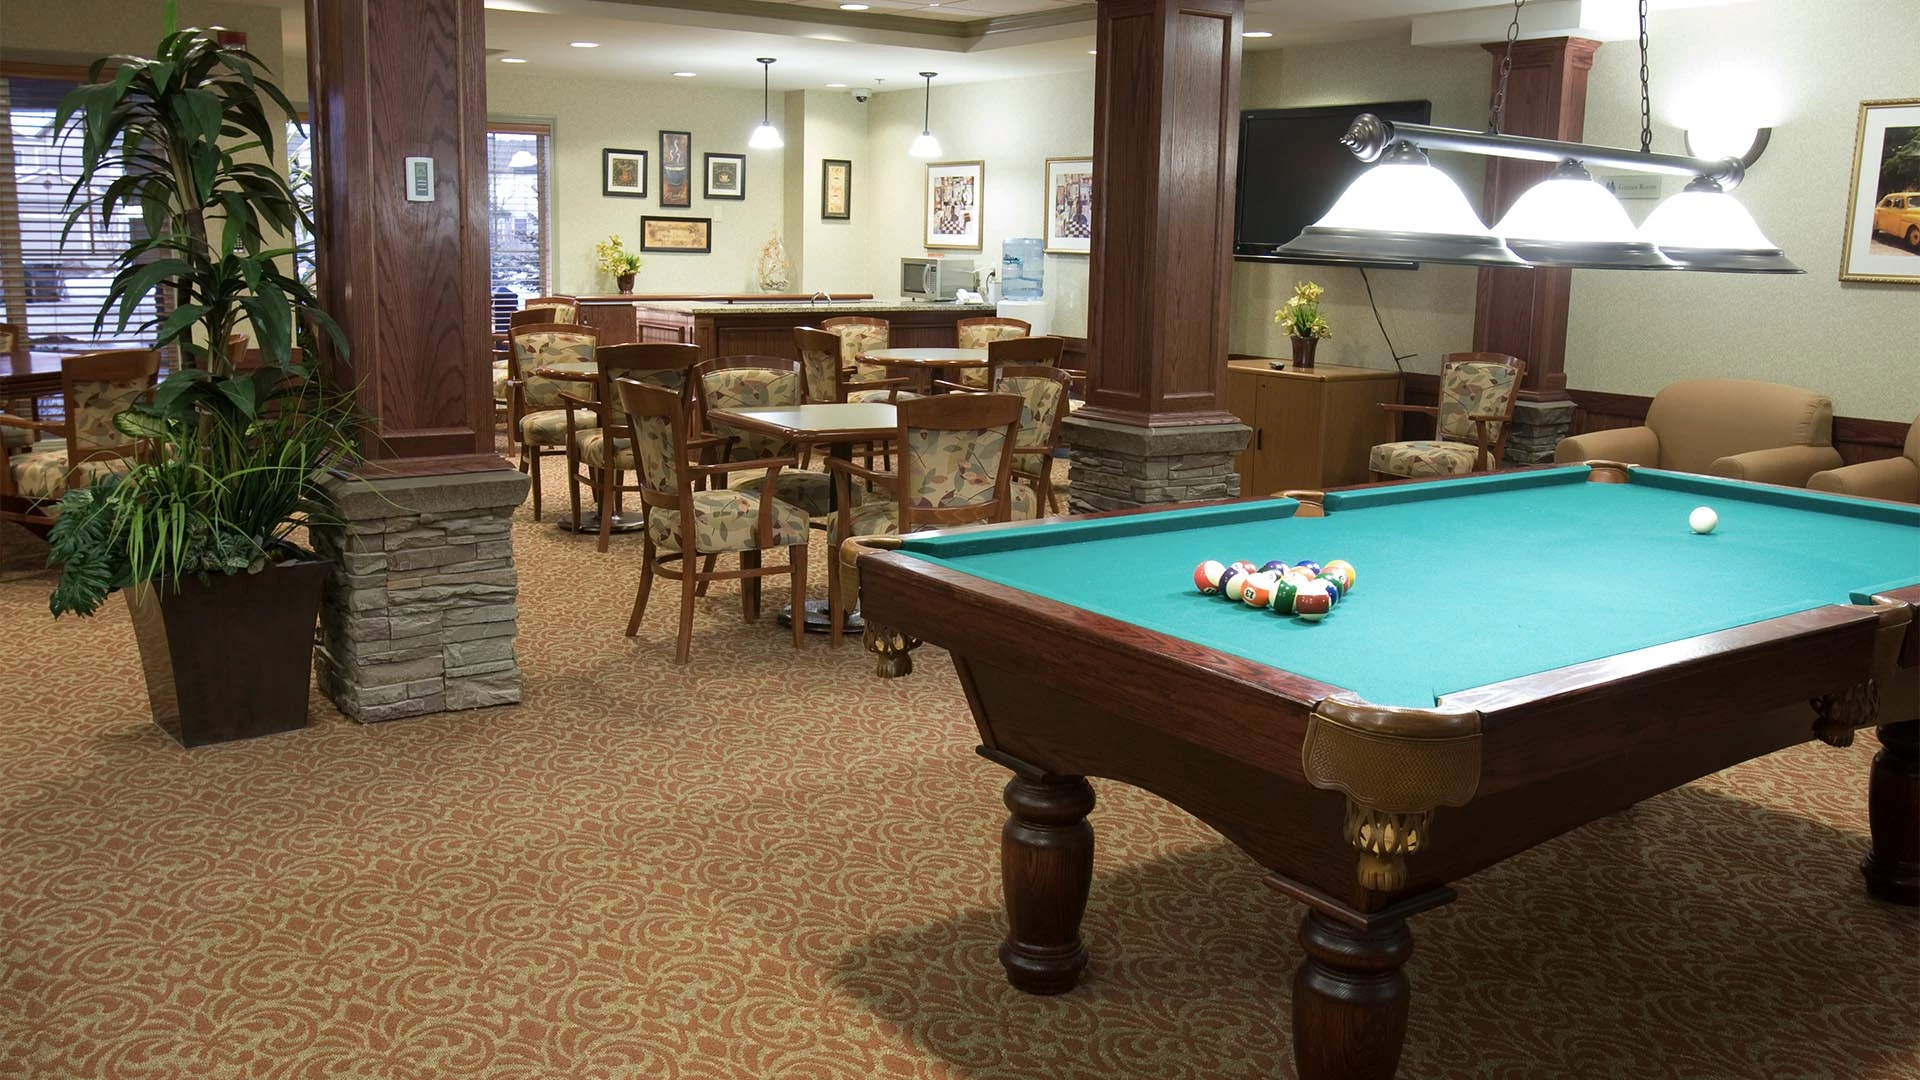 The pool table and card tables in the Rutherford Heights senior living games room